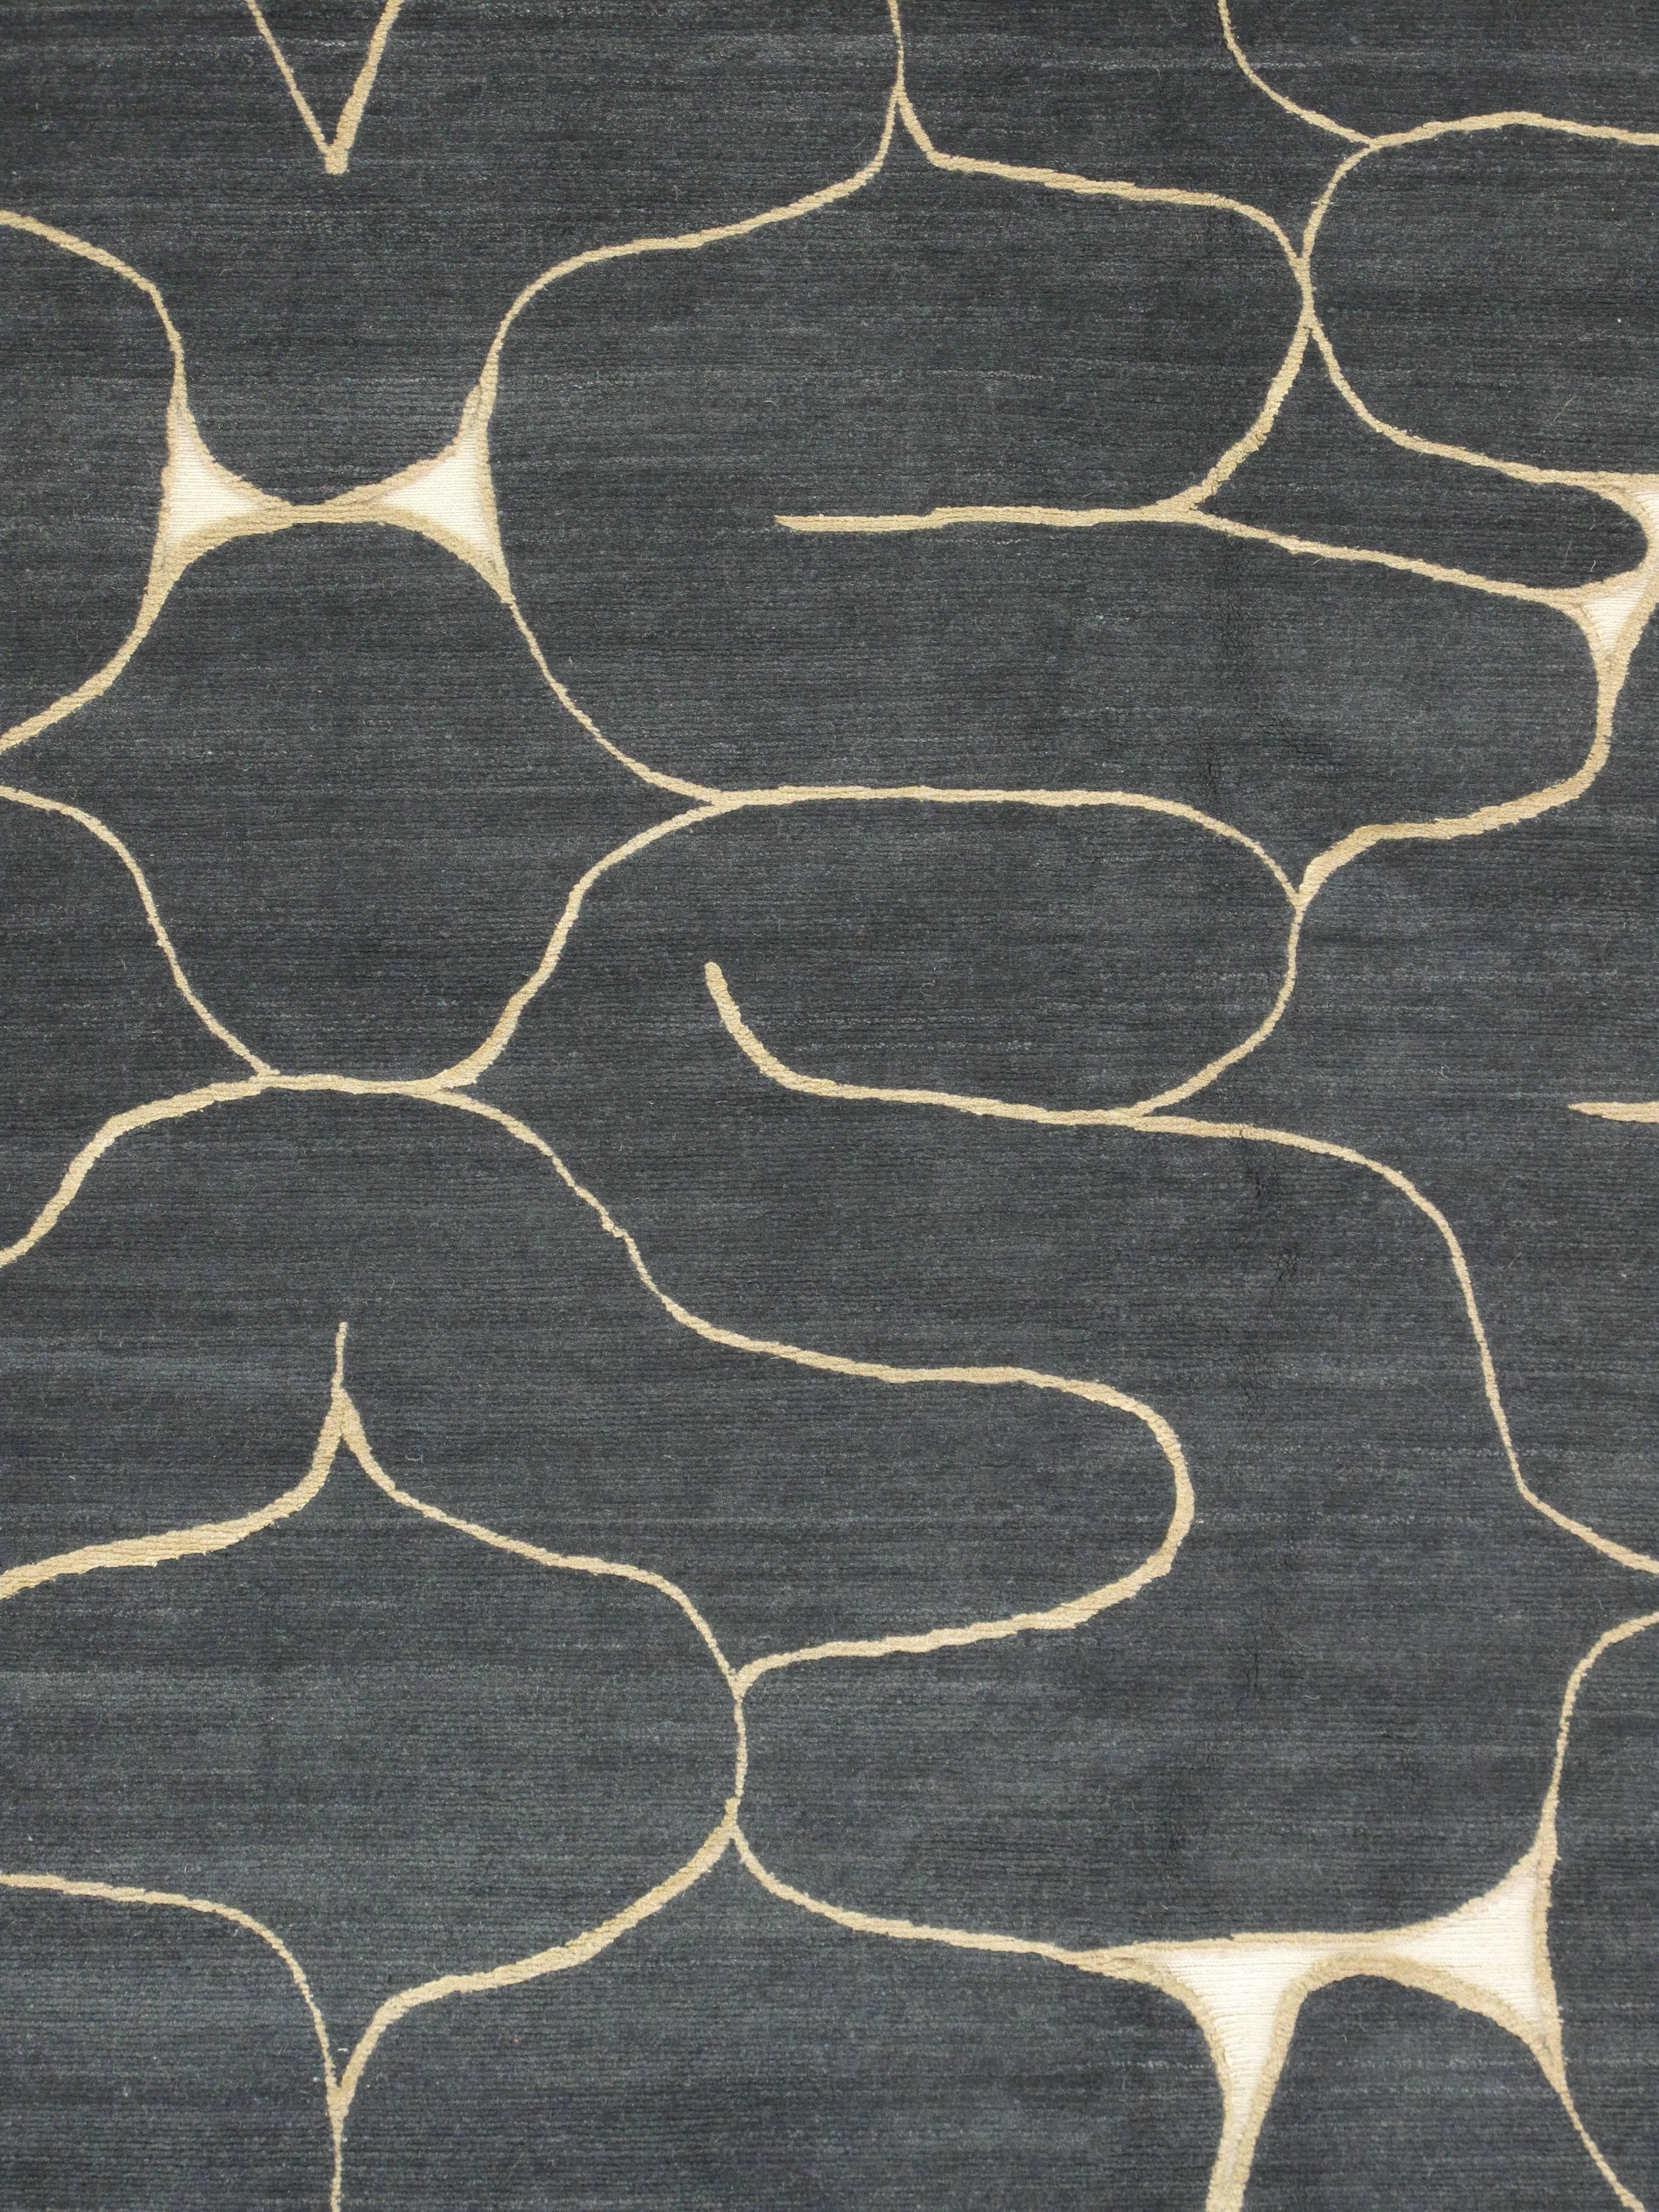 Hand-knotted rug in Himalayan wool with silk accents, GoodWeave certified.